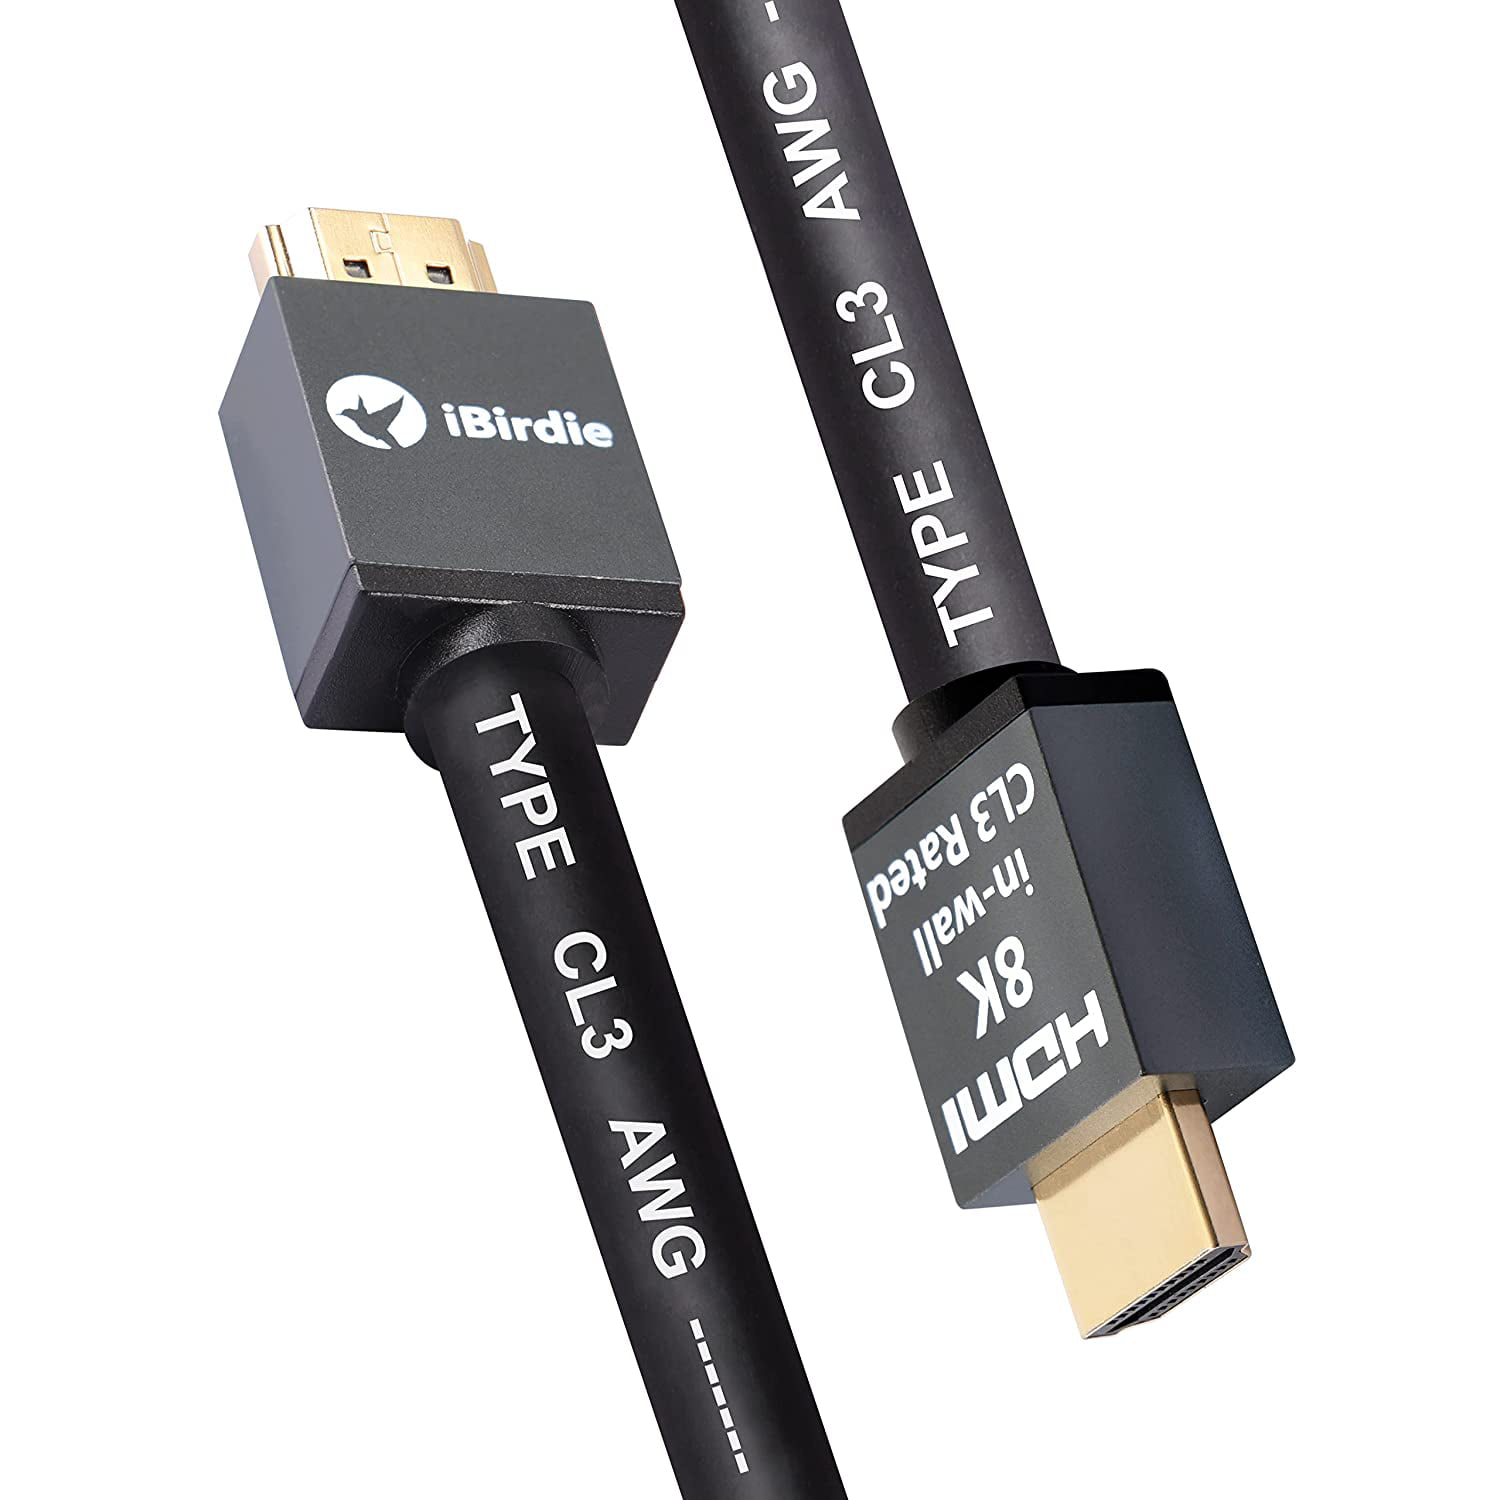 HDMIF-10M Cable: HDMI, UL Listed, CL3 Rated In-Wall, Flat Design